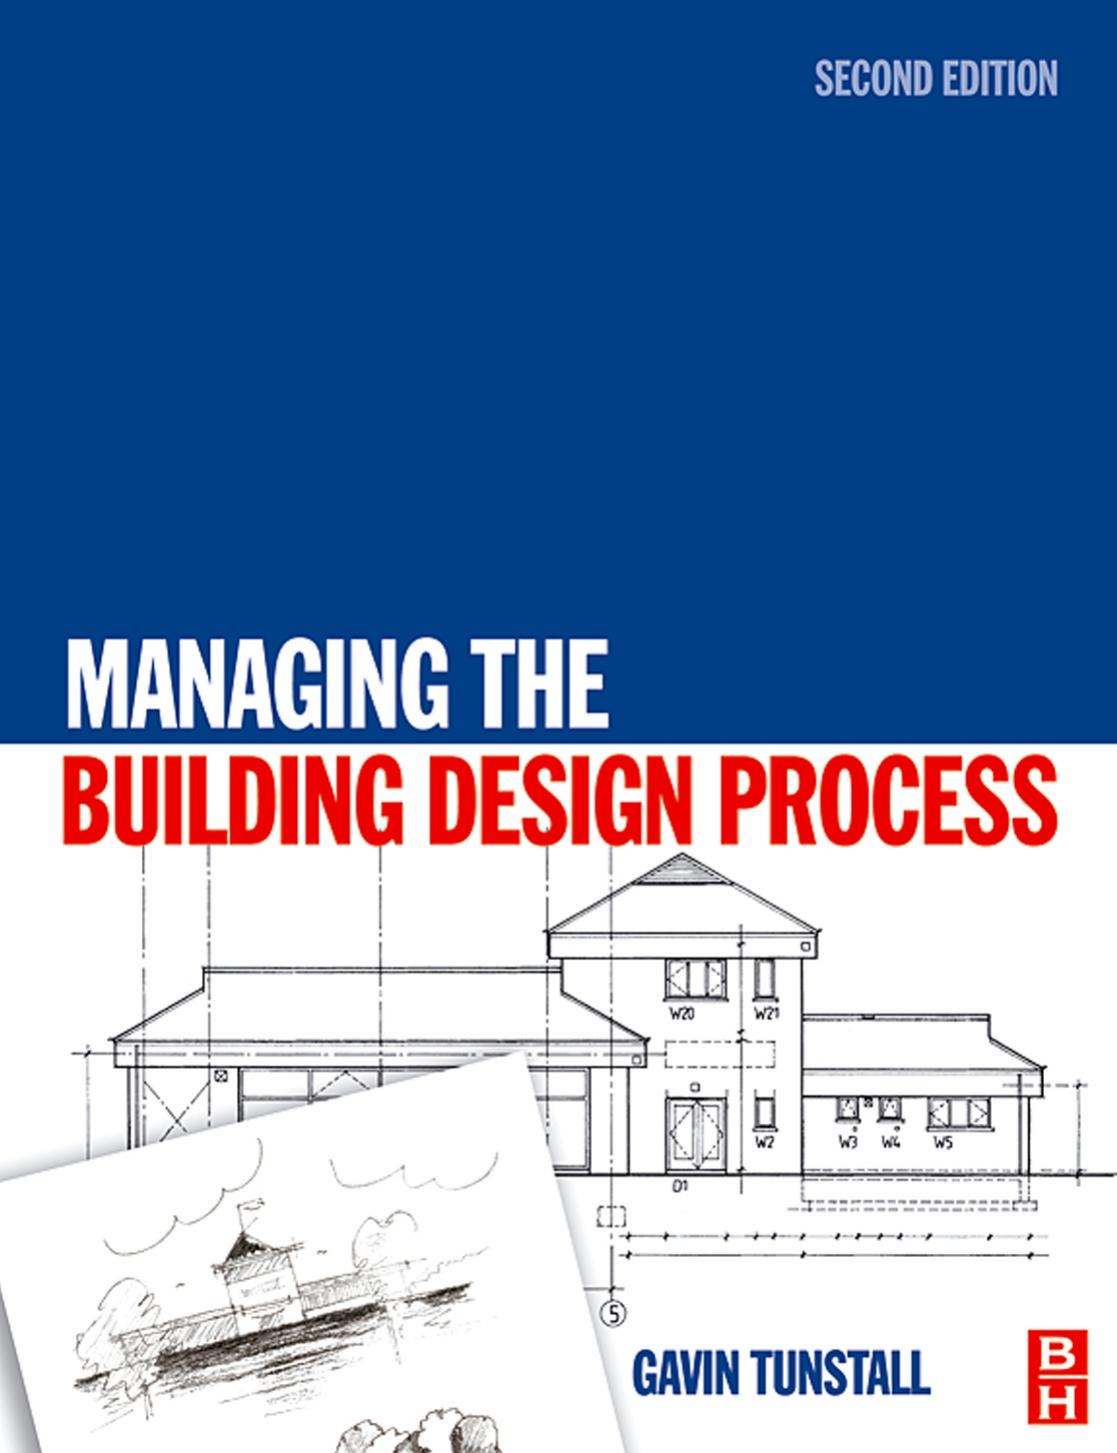 Managing the Building Design Process, Second Edition